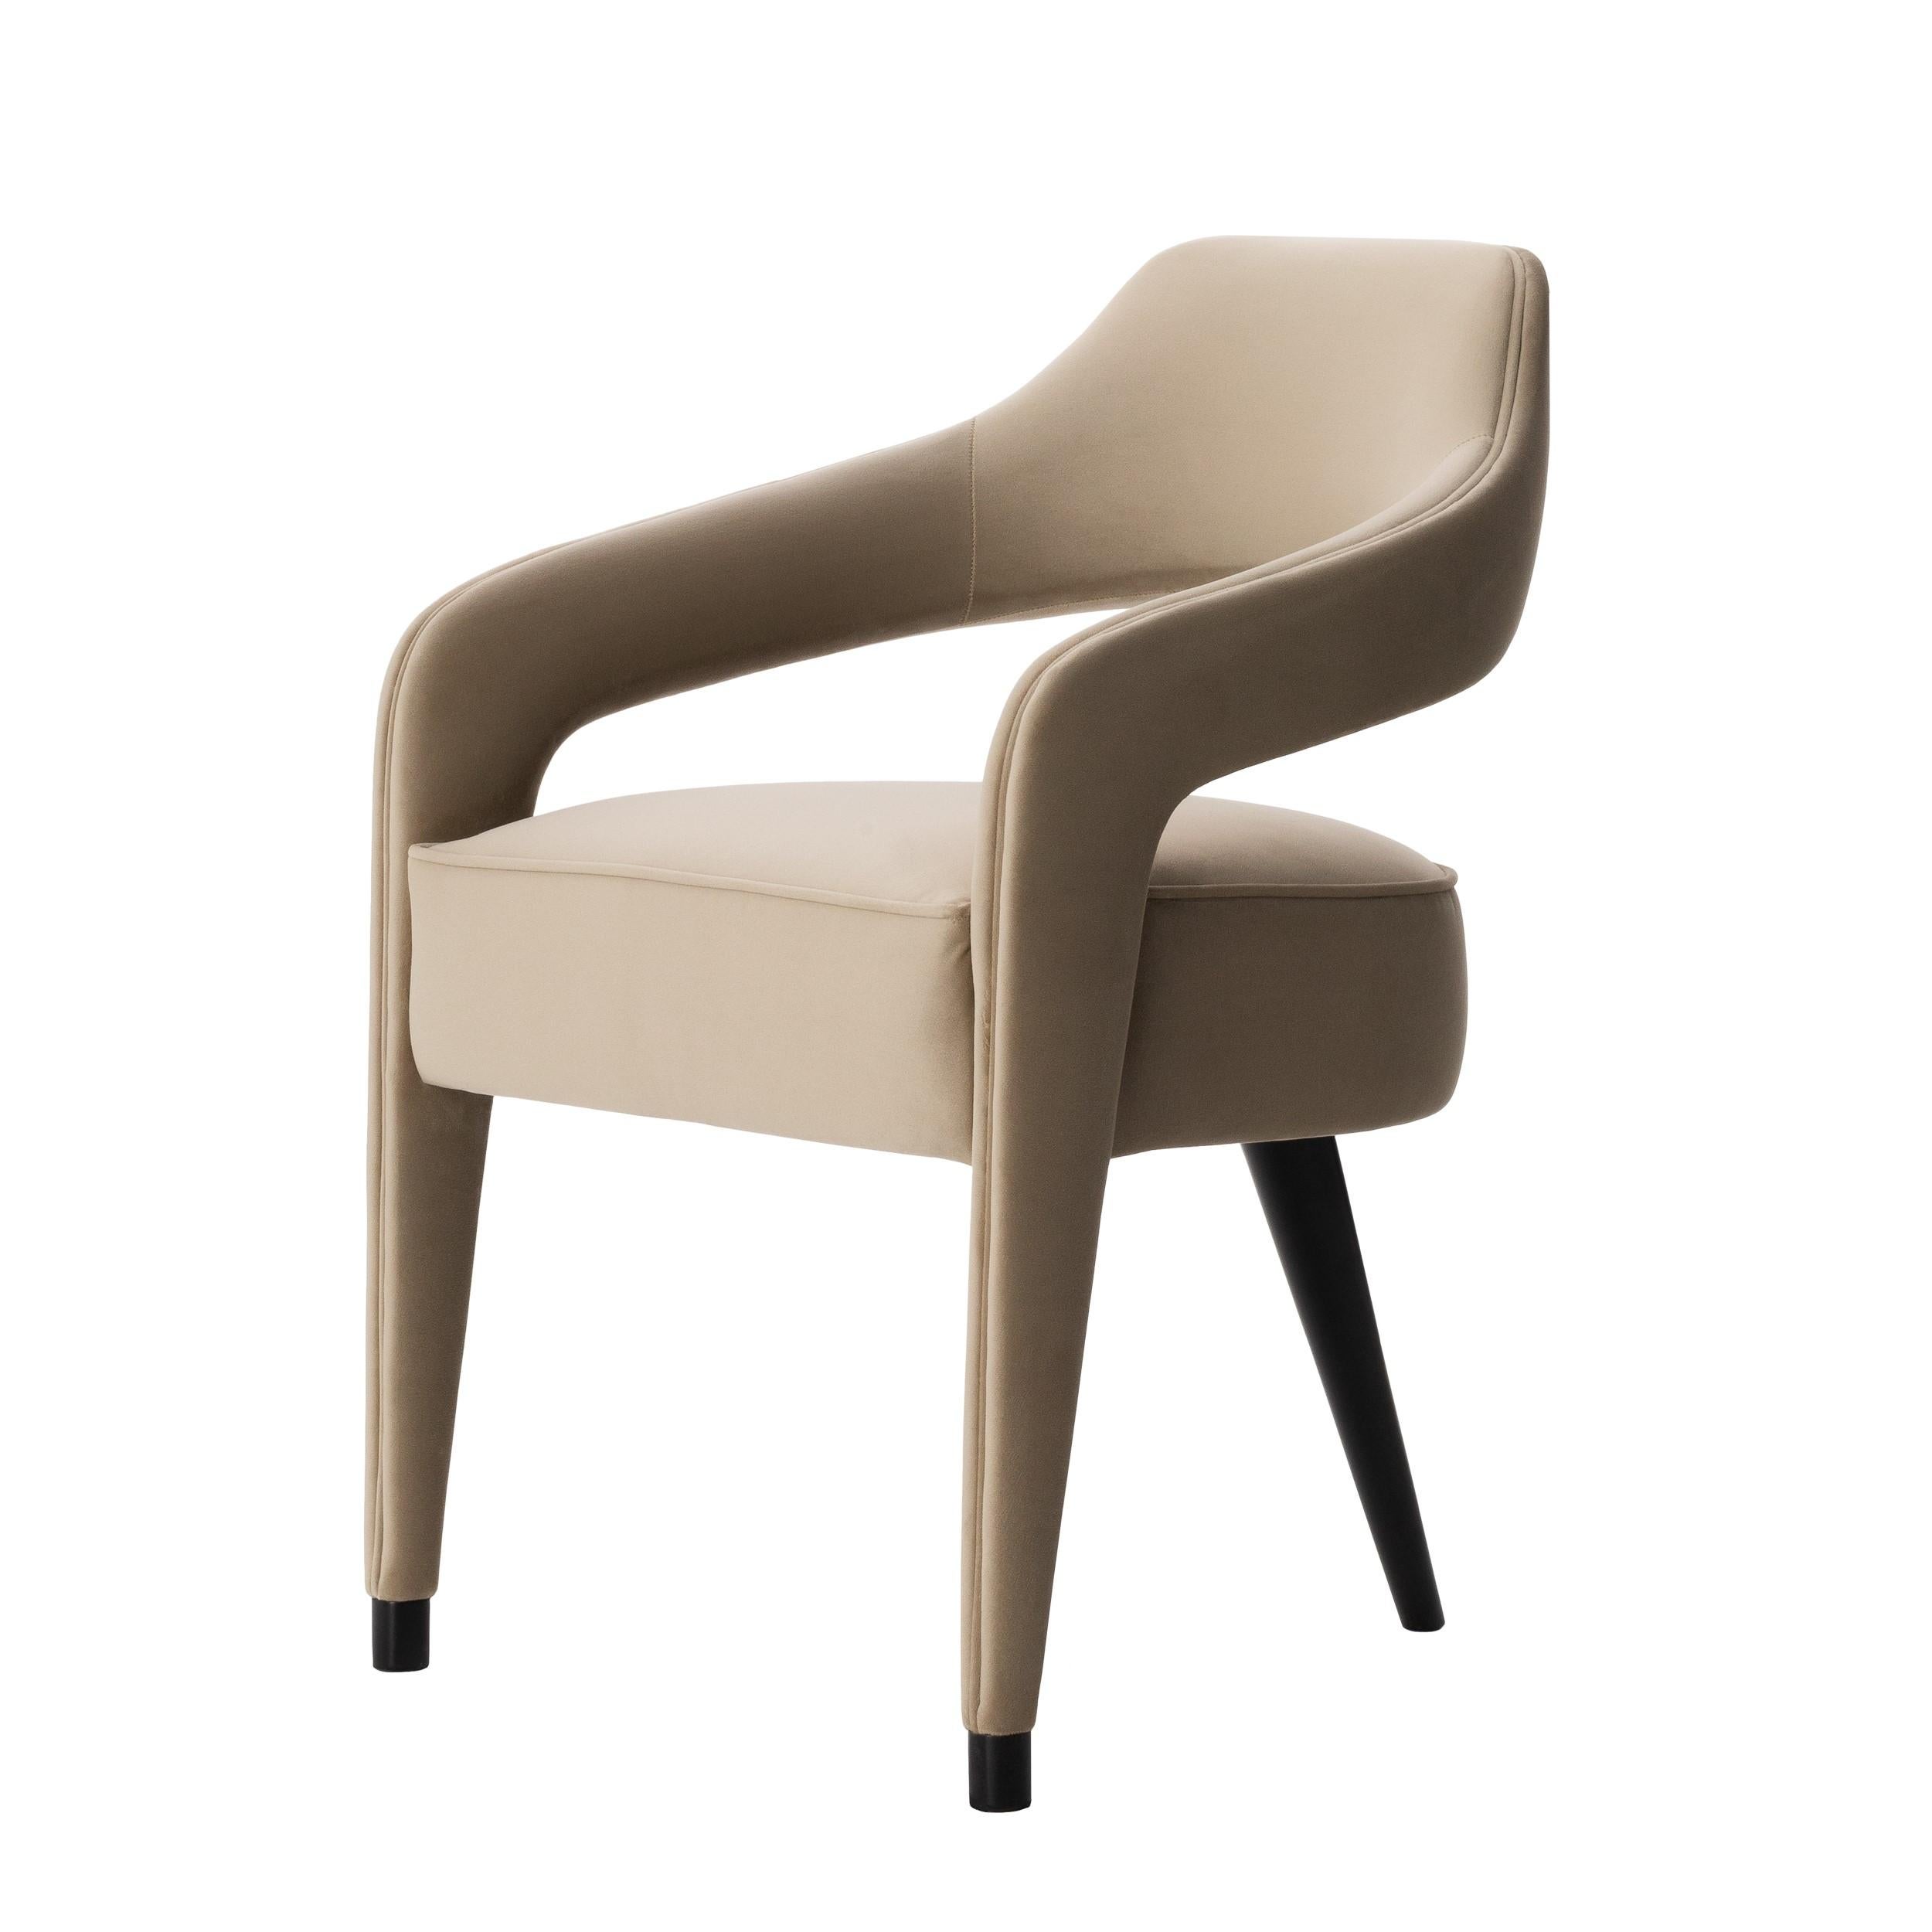 Modern INVICTA dining chair with contrast piping For Sale